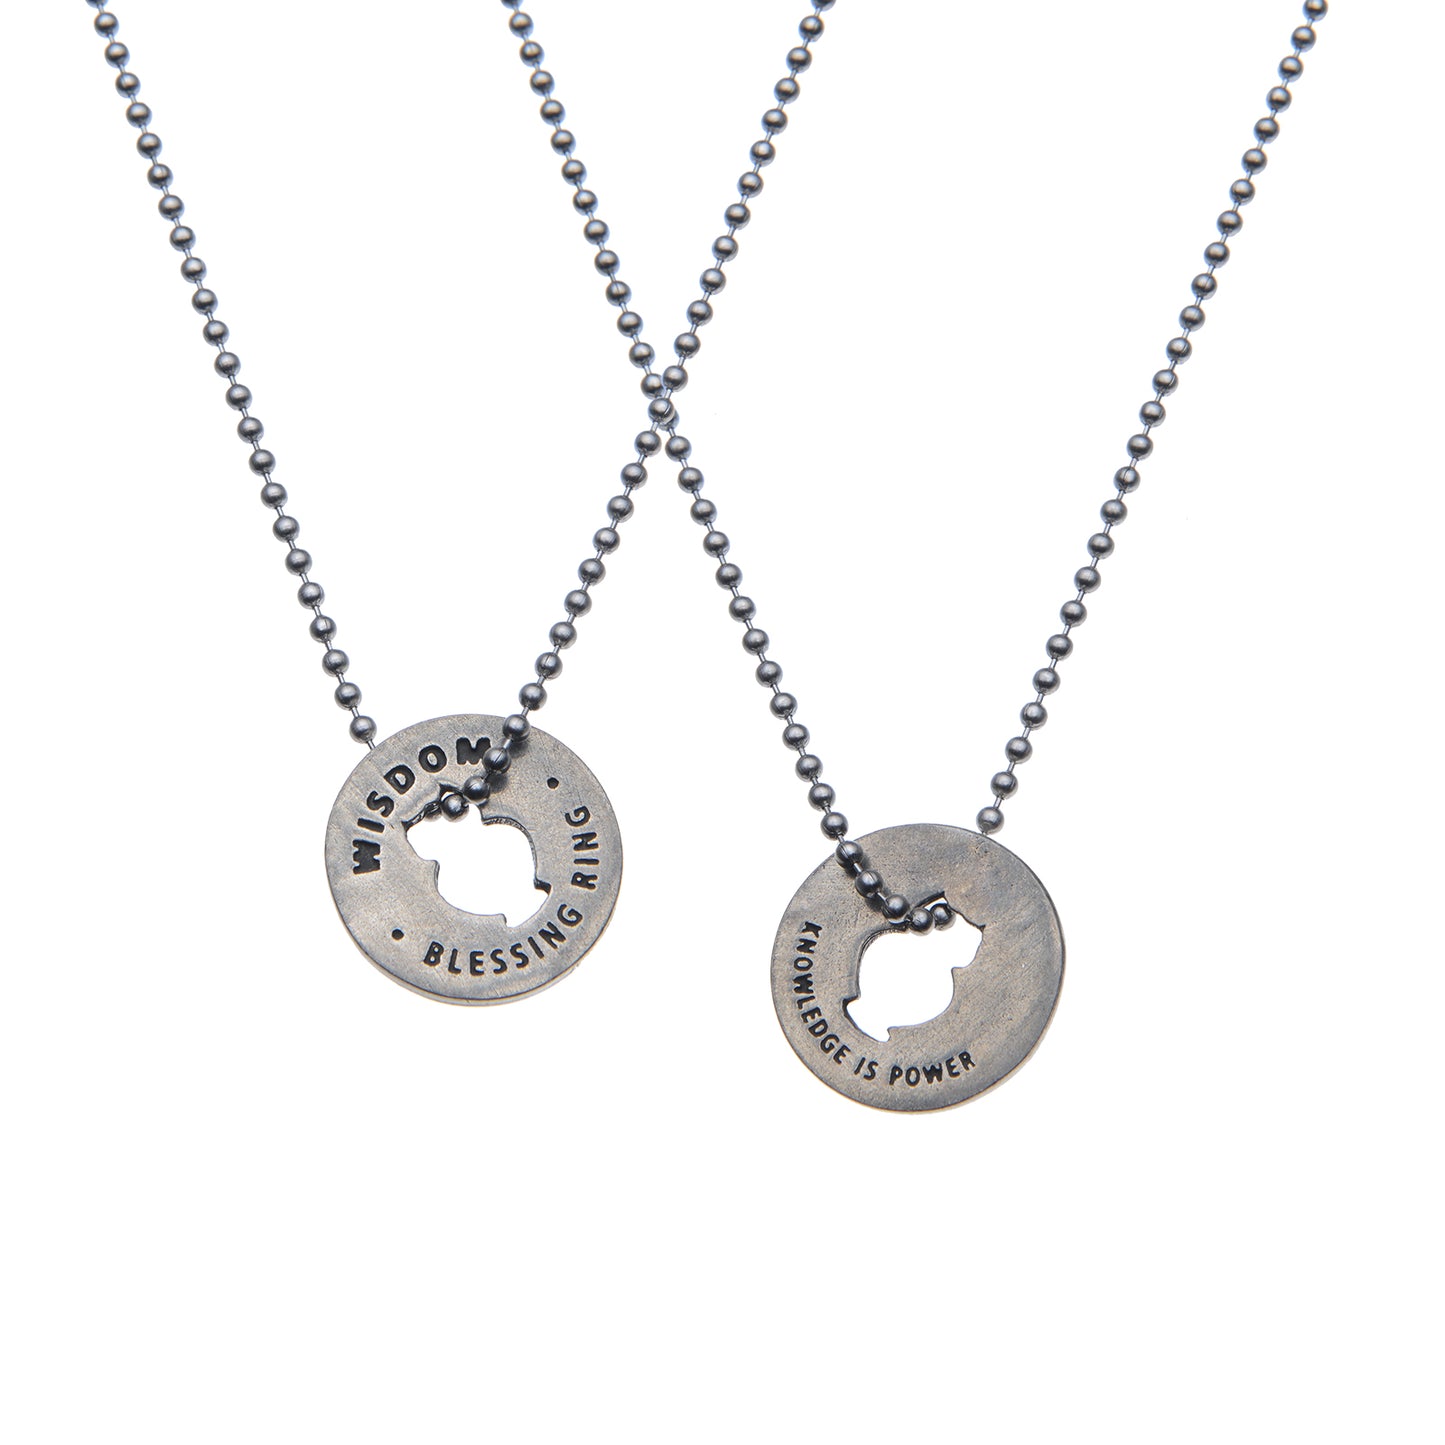 Wisdom Blessing Rings on a necklace